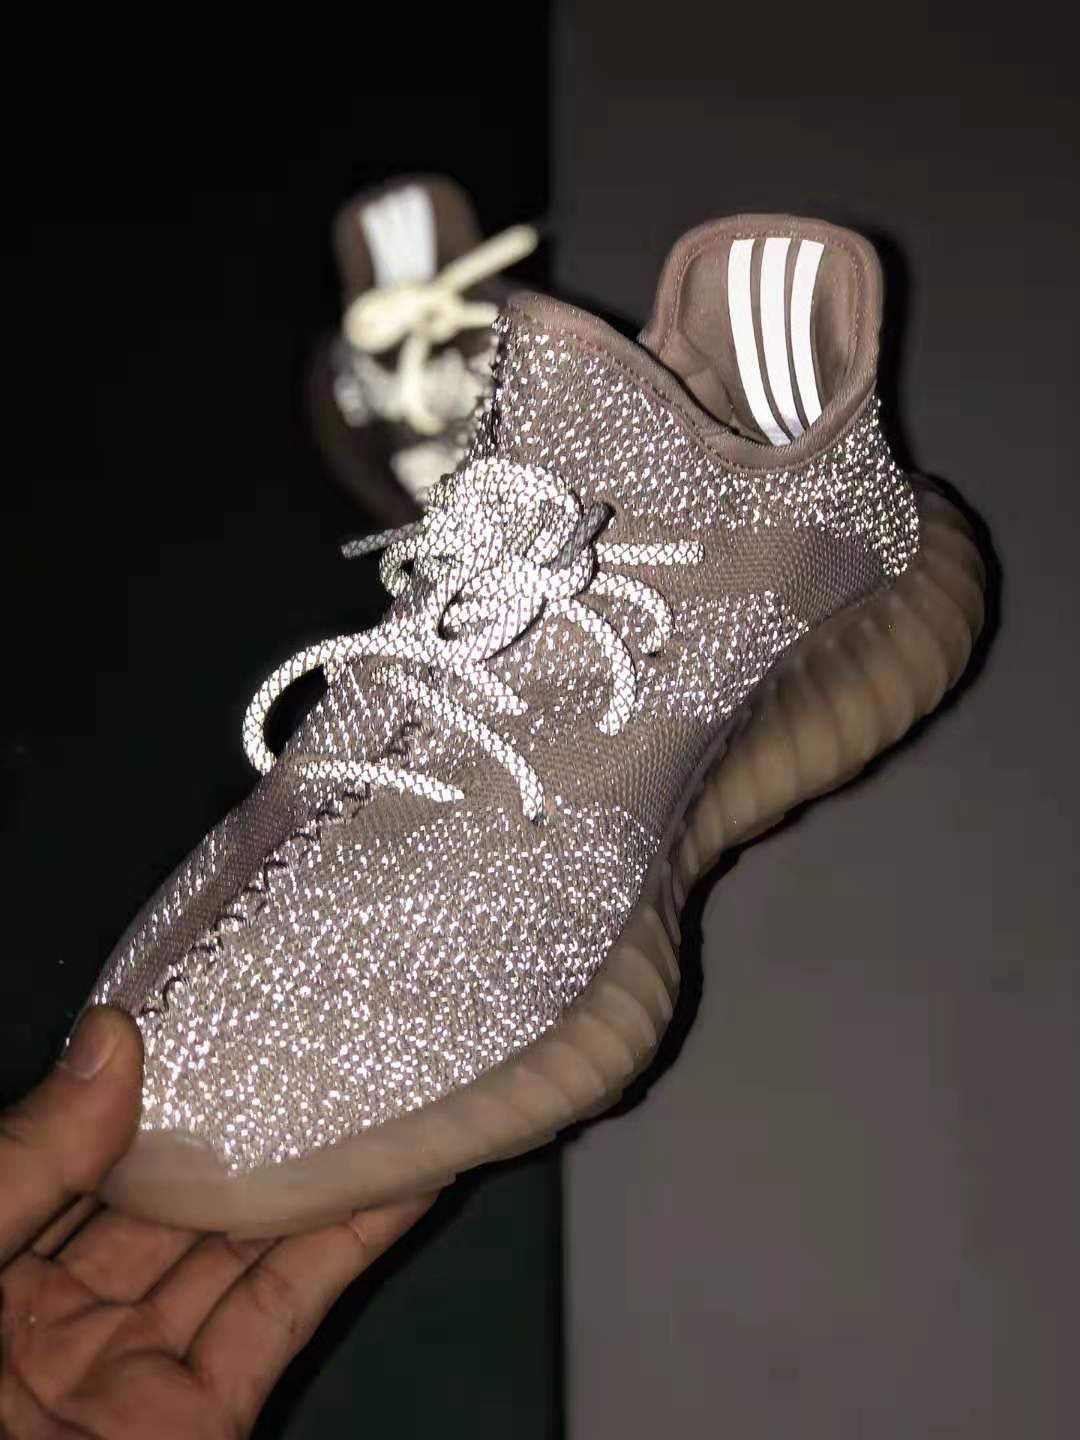 Adidas Yeezy Boost 350 V3 Synth Reflective FV5668 - Stylish and Reflective Sneakers